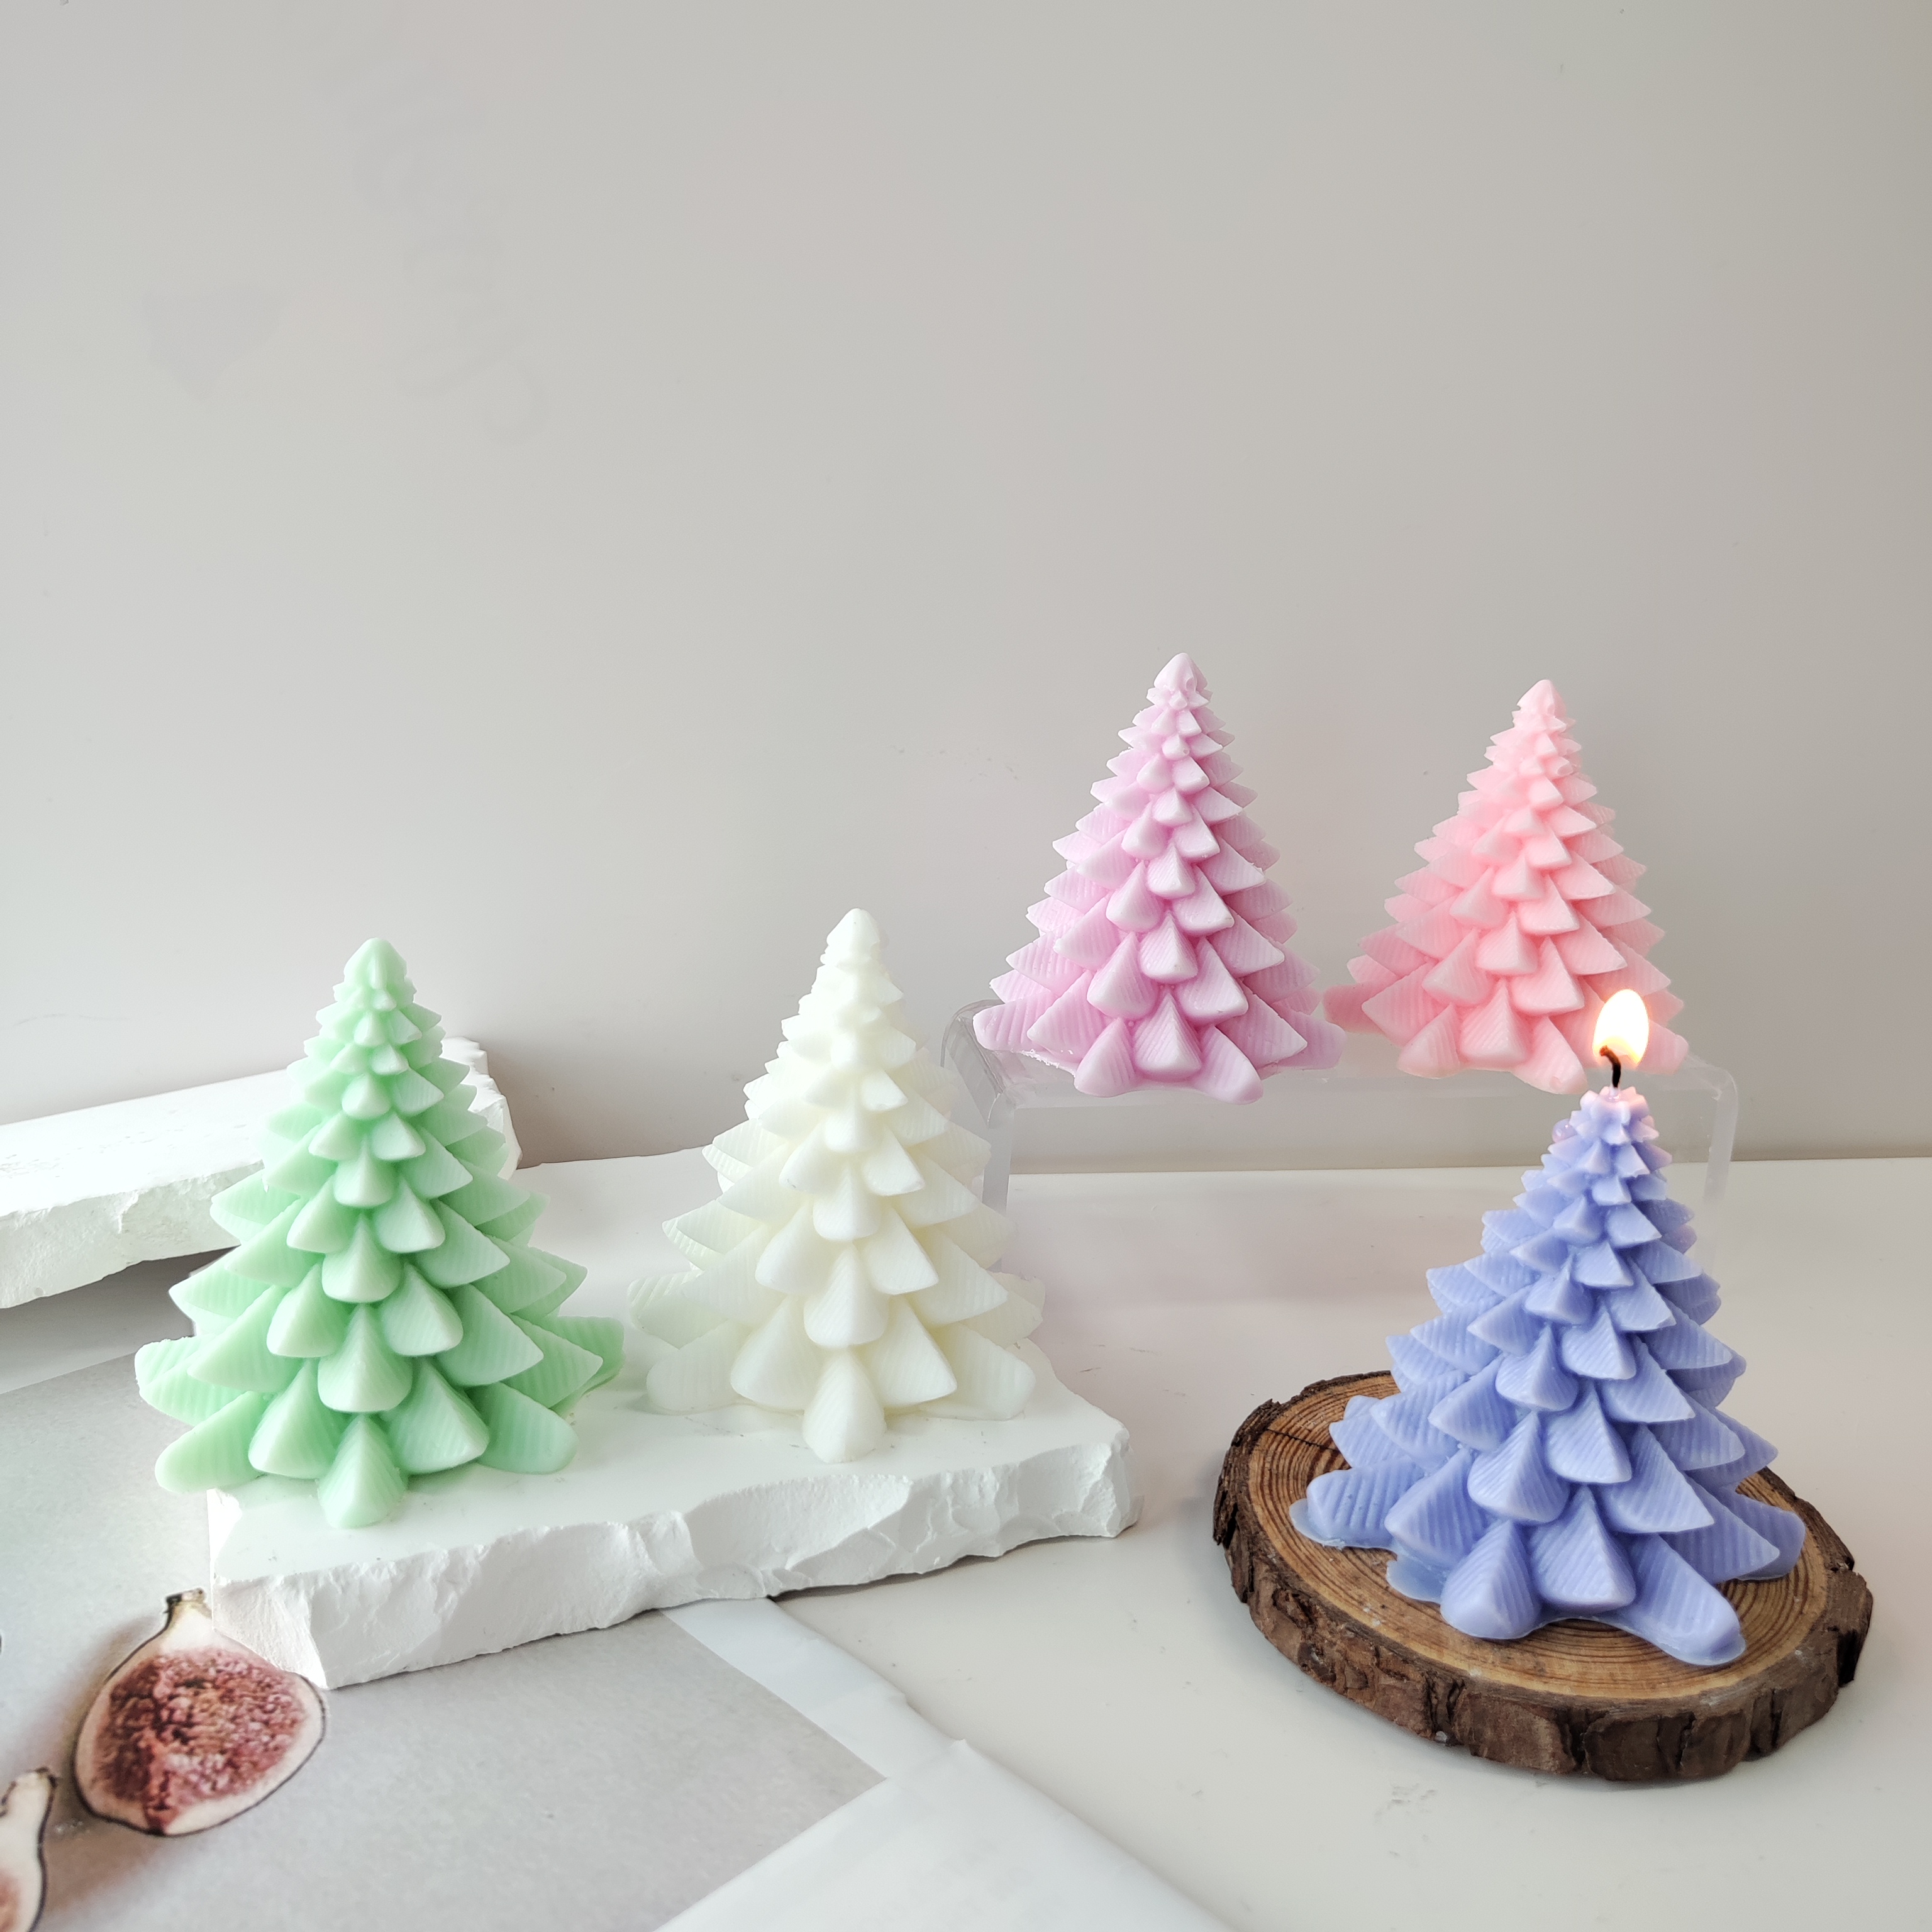 J56  Wholesale Christmas Gift Home Decoration Desktop Crafts Pine Shaped Candles Christmas Tree Scented Candle